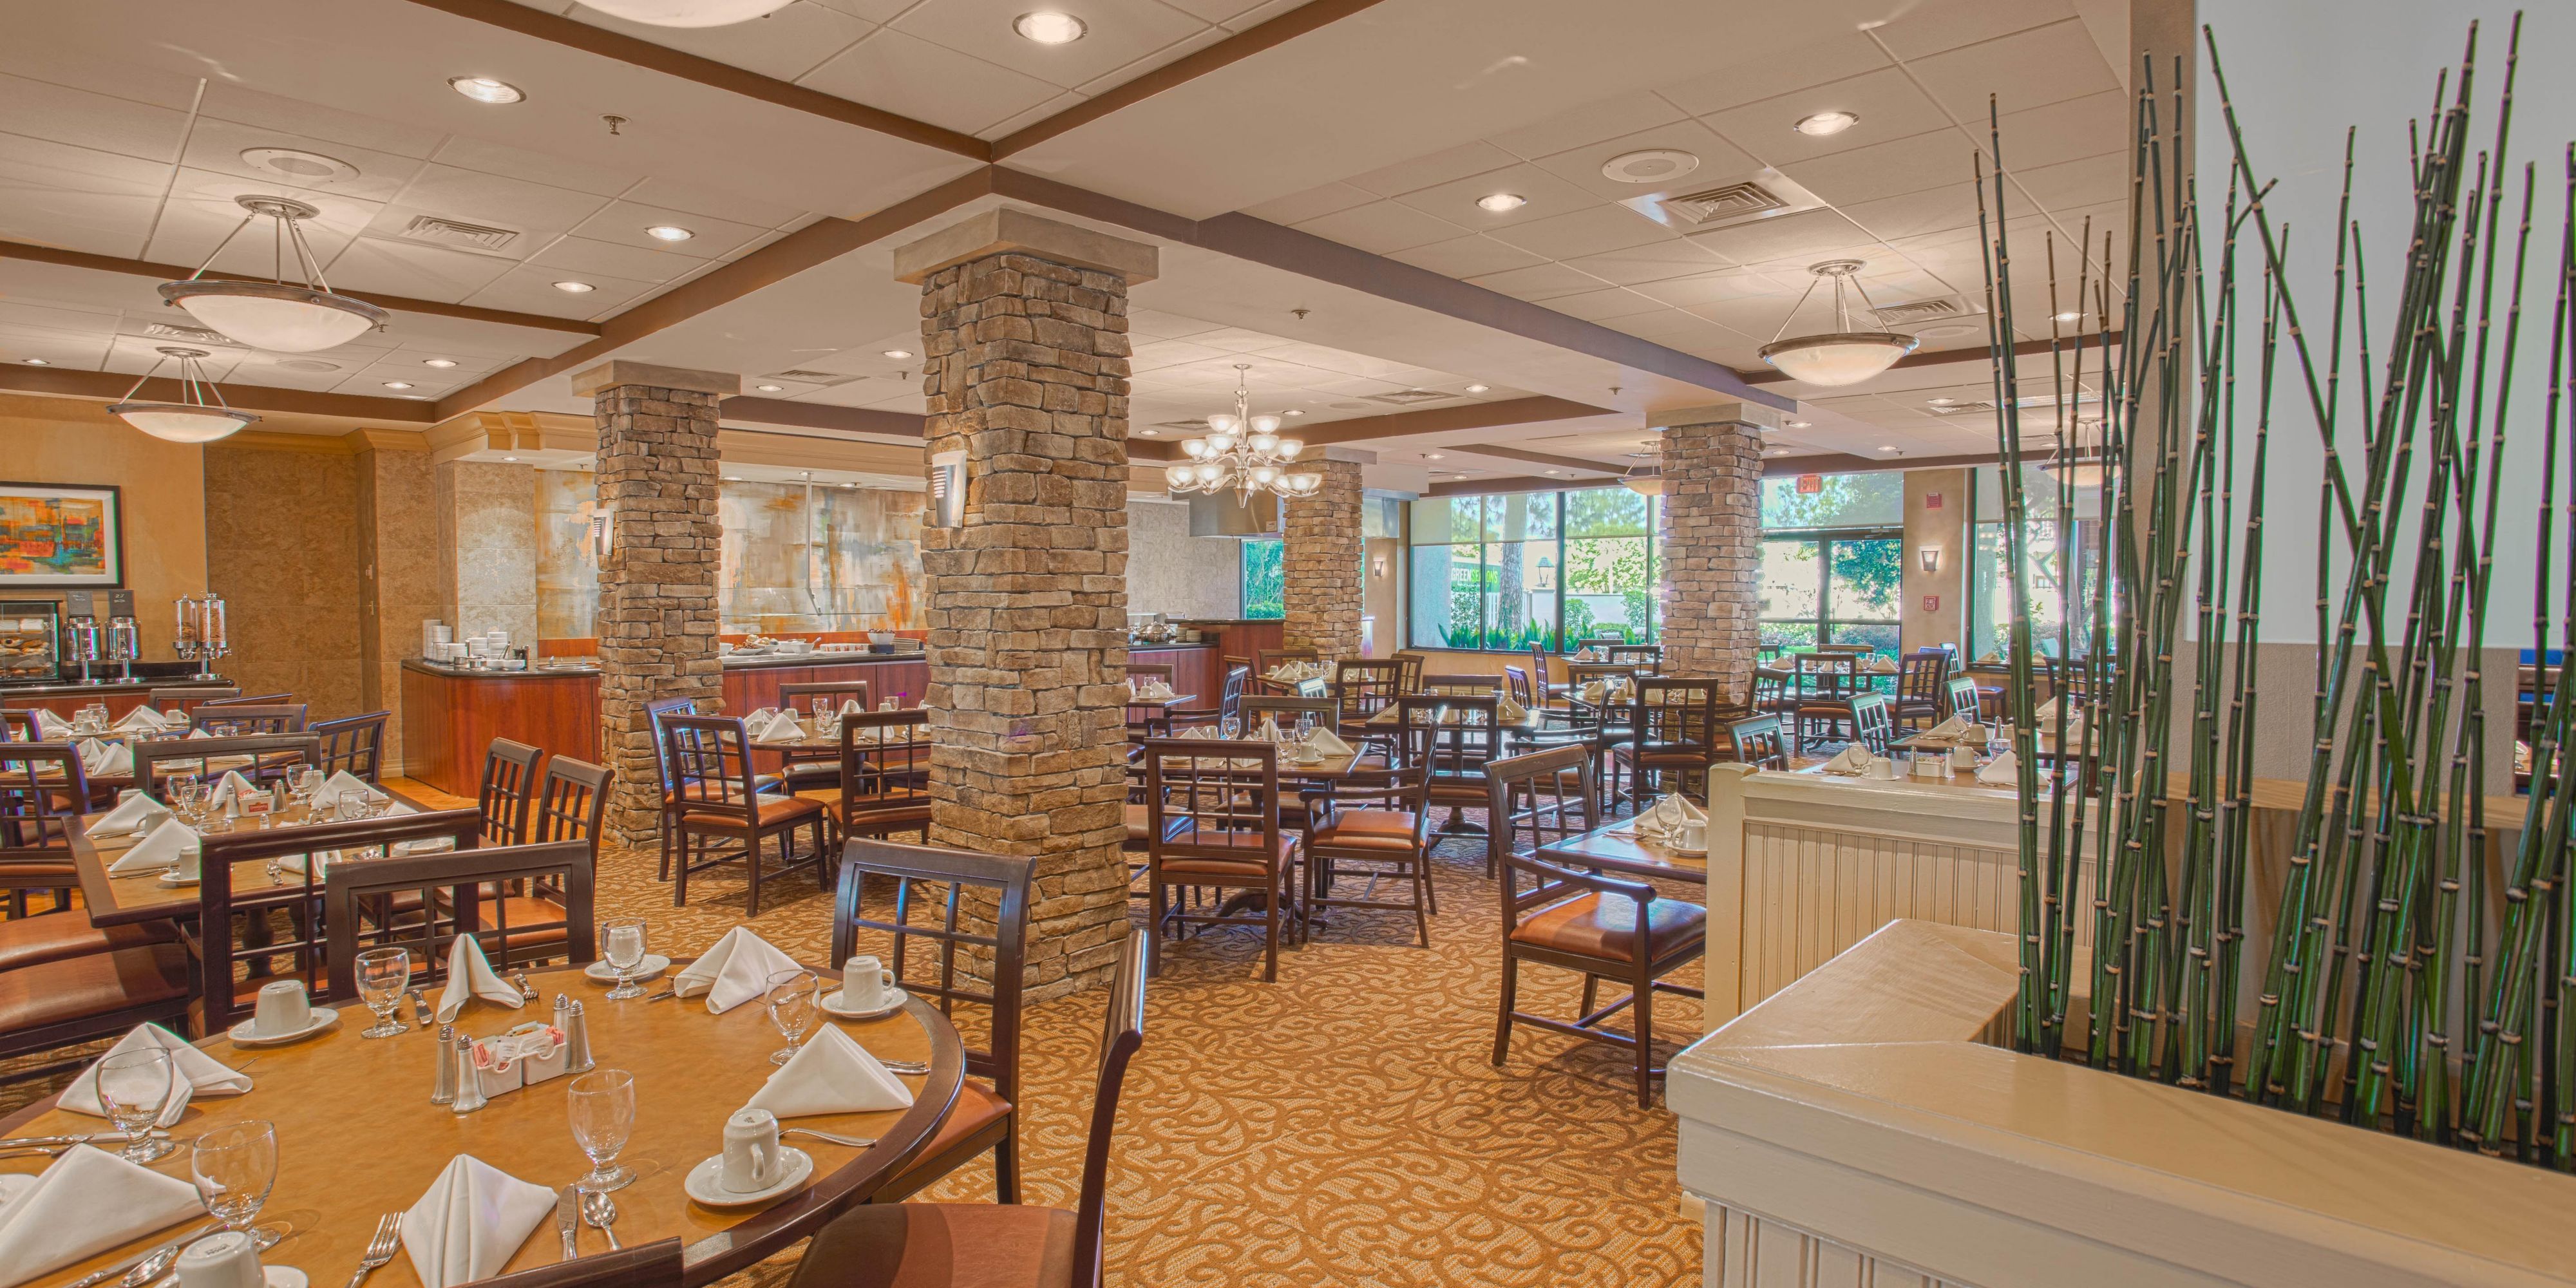 Enjoy a lovely evening at the Patio Grille Restaurant